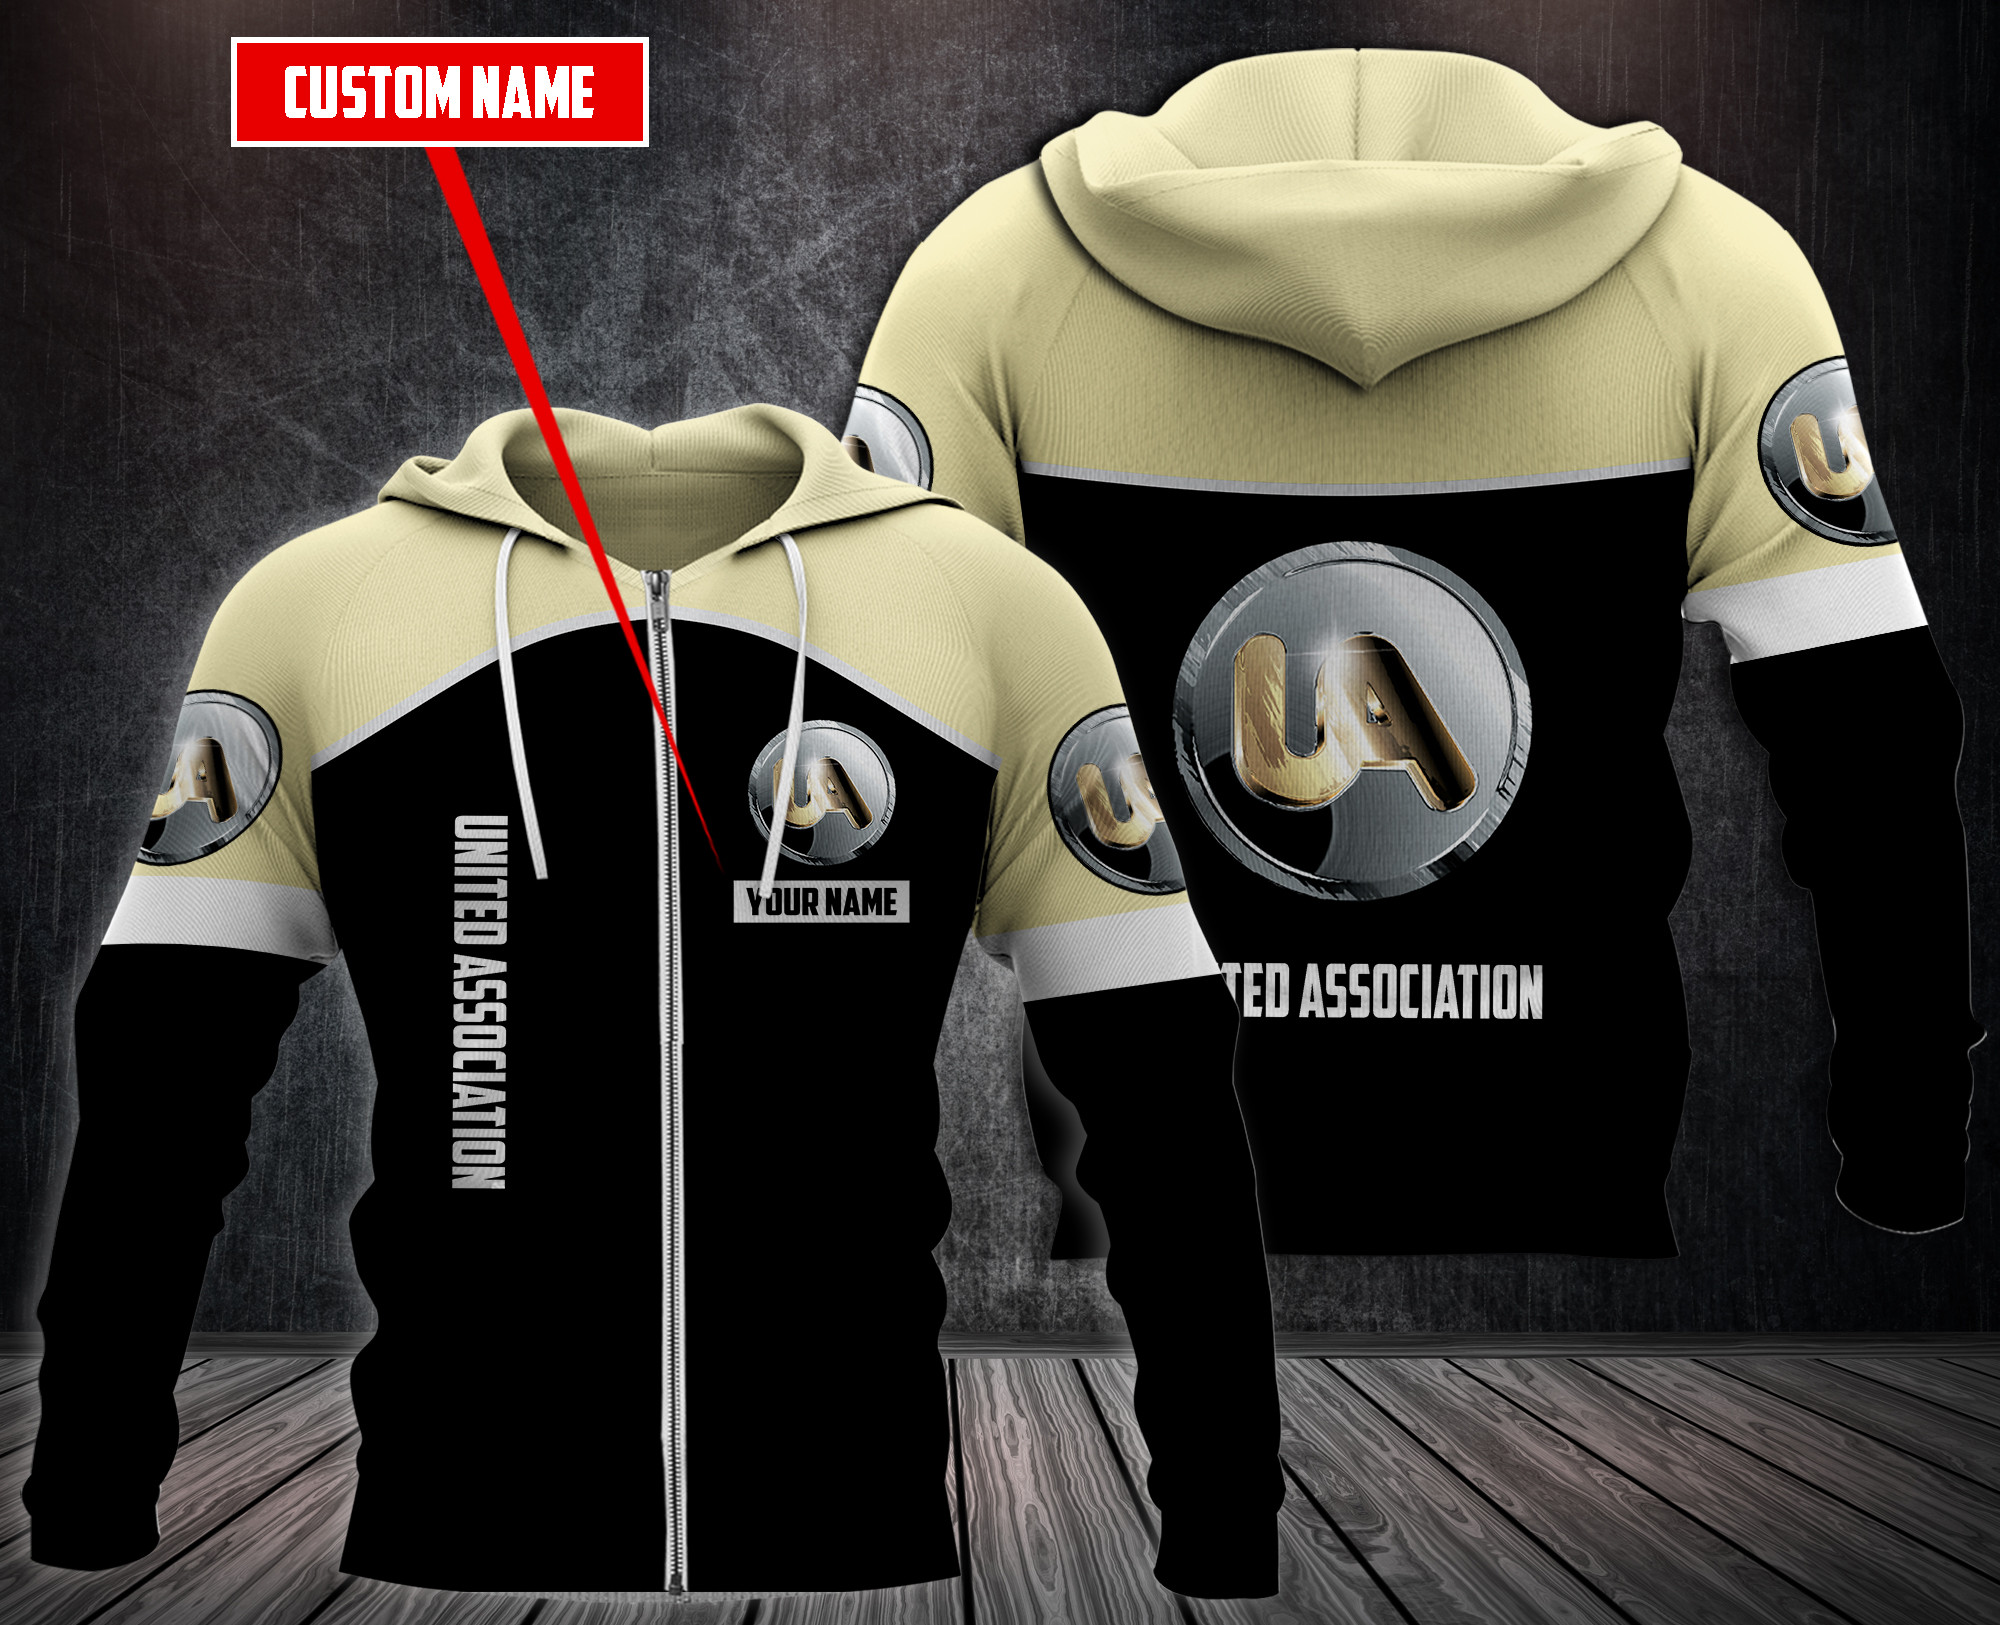 Choose the right hoodies for you on our boxboxshirt and ethershirt websites in 2022 129